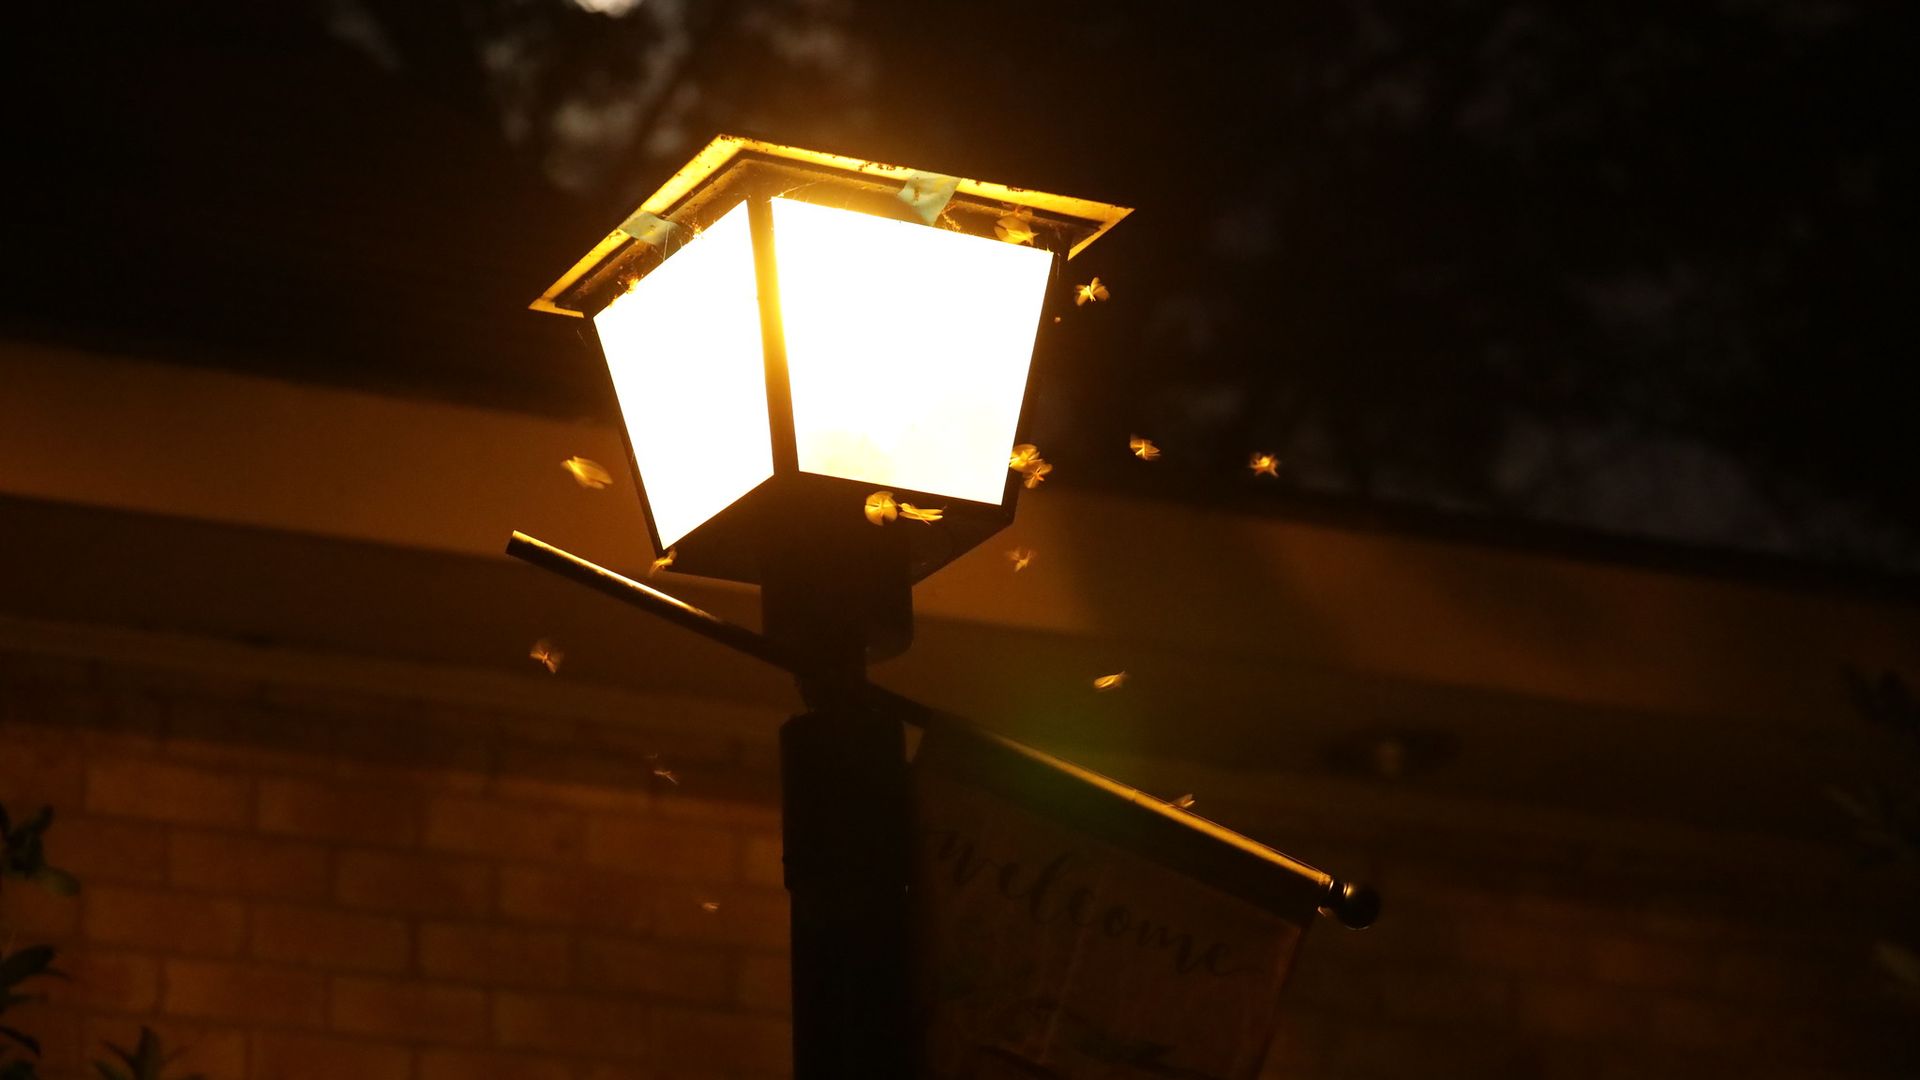 Photo shows a streetlight on at night. Flying termites are swarming around the streetlight.